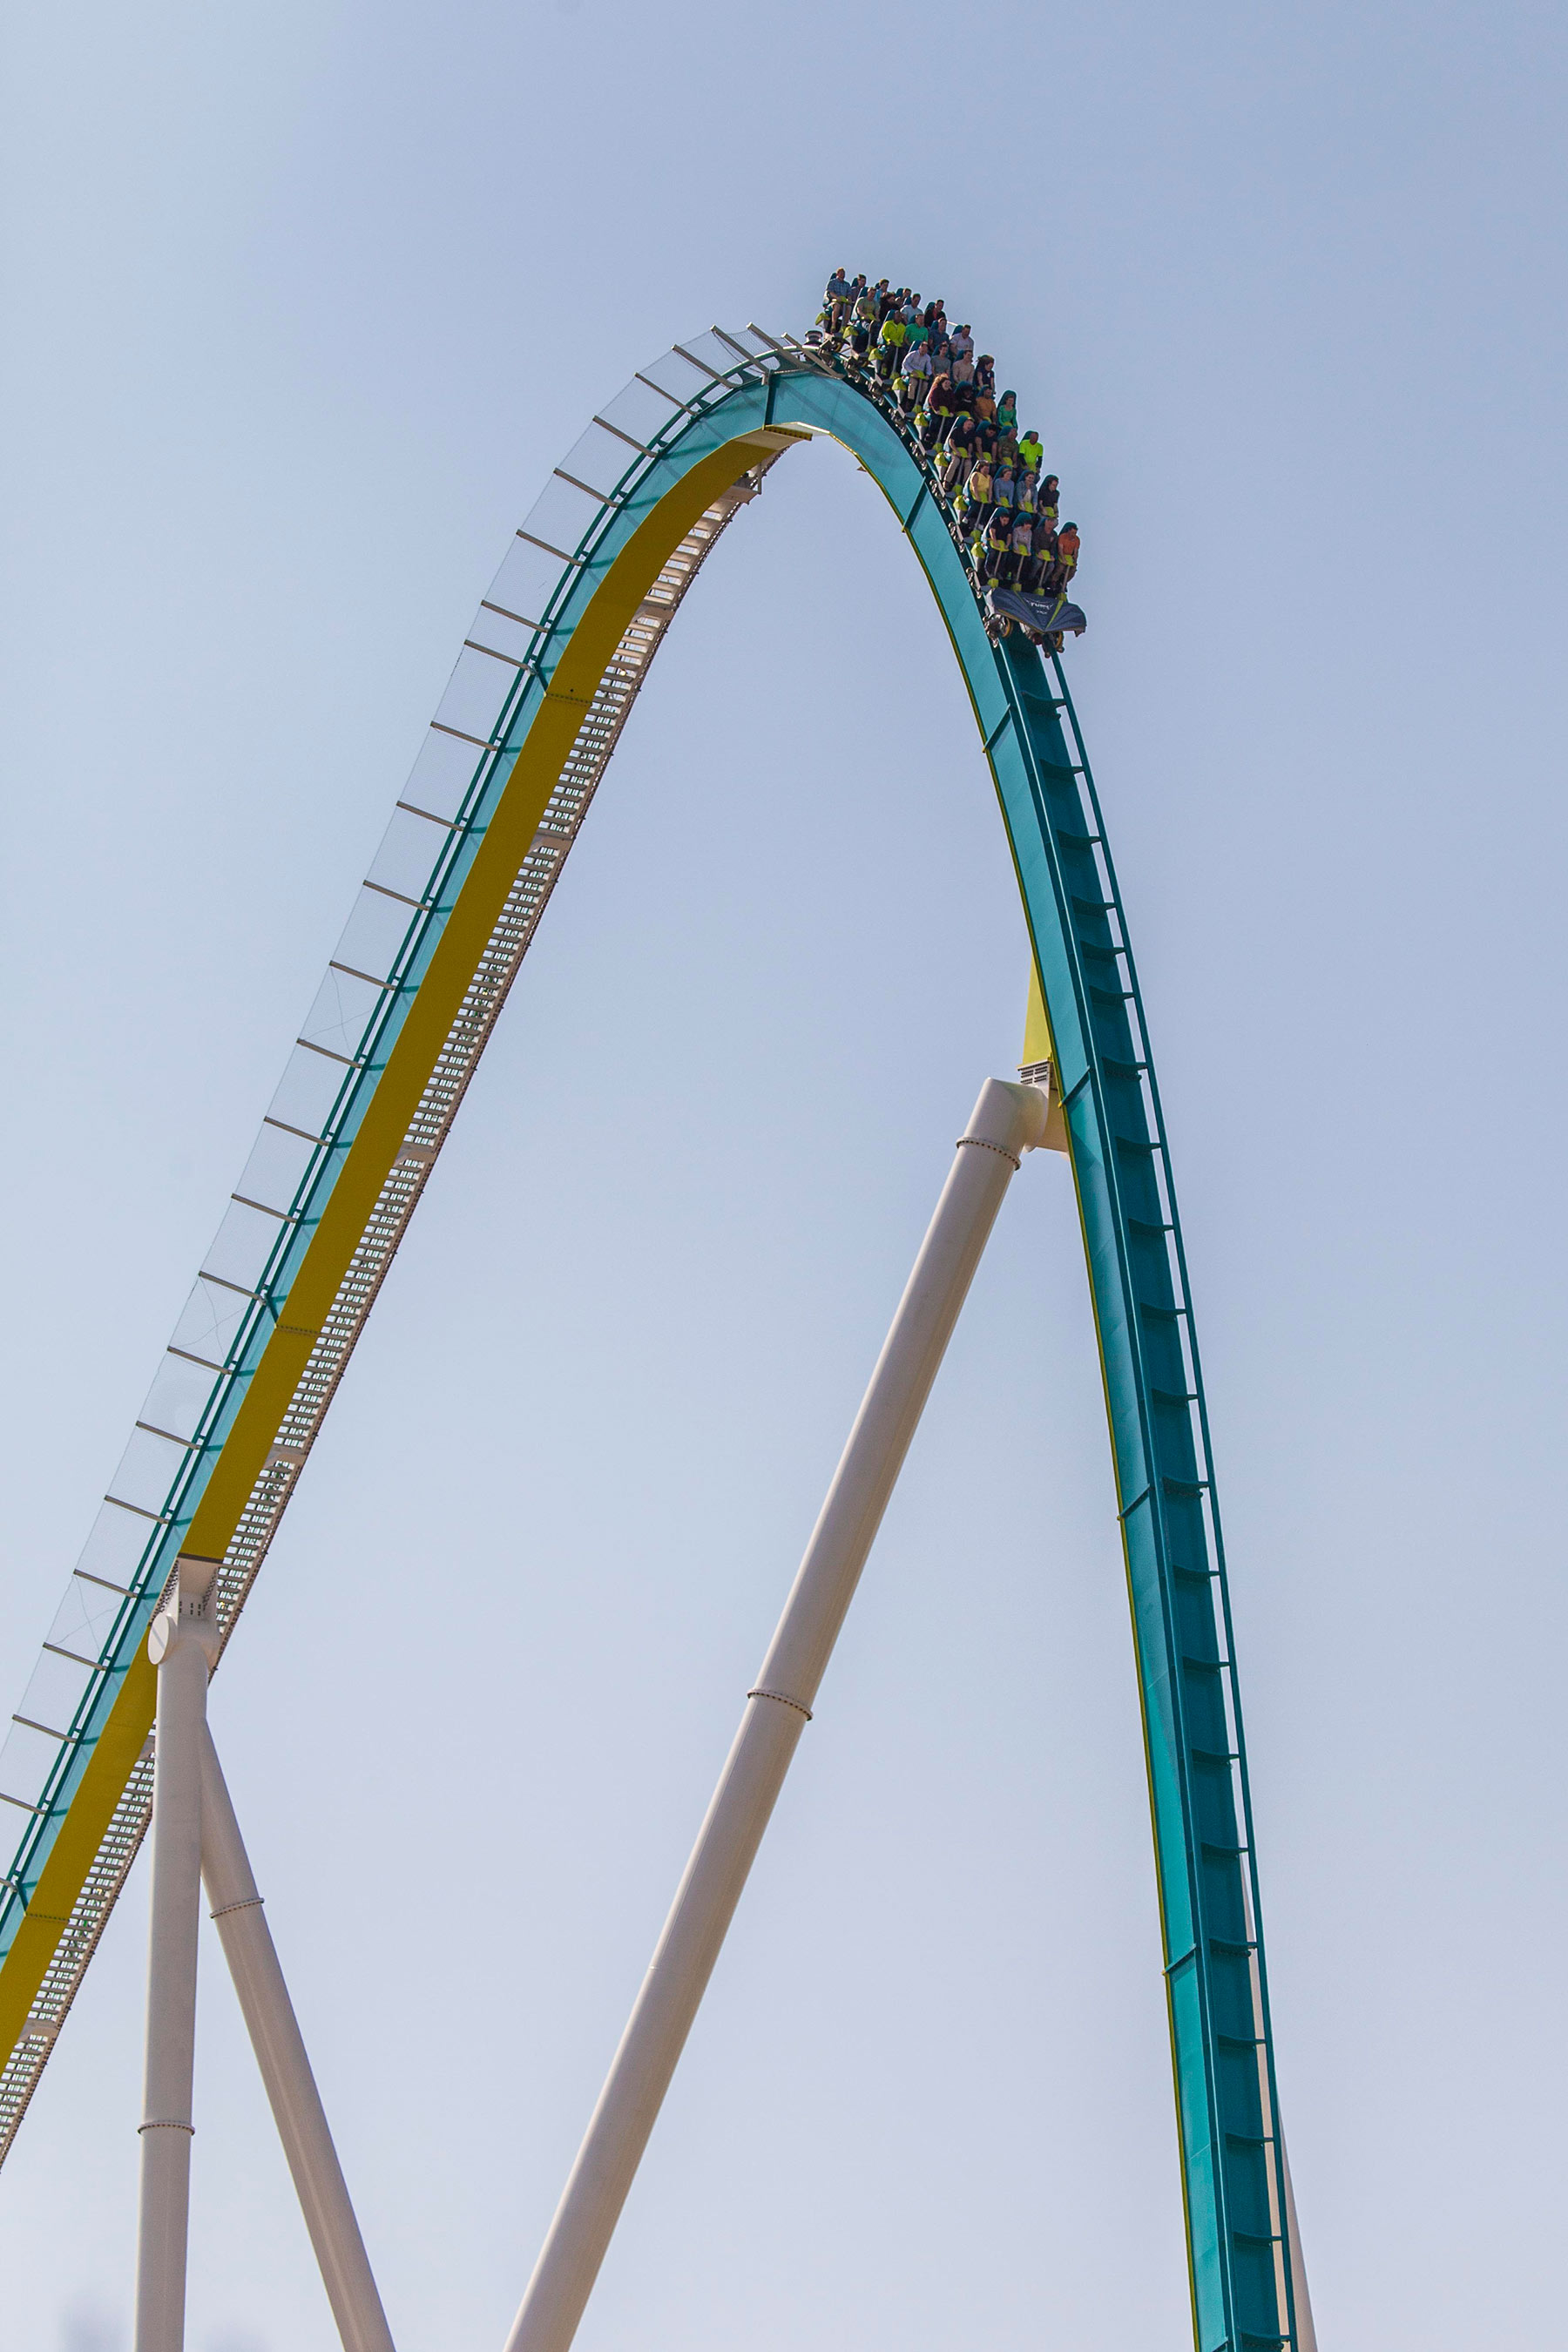 Fury 325, the tallest and fastest giga coaster in the world, crests the top of the lift hill and dives right into its first drop at an astonishing 81-degree angle. Fury 325 is also the longest steel roller coaster in North America.